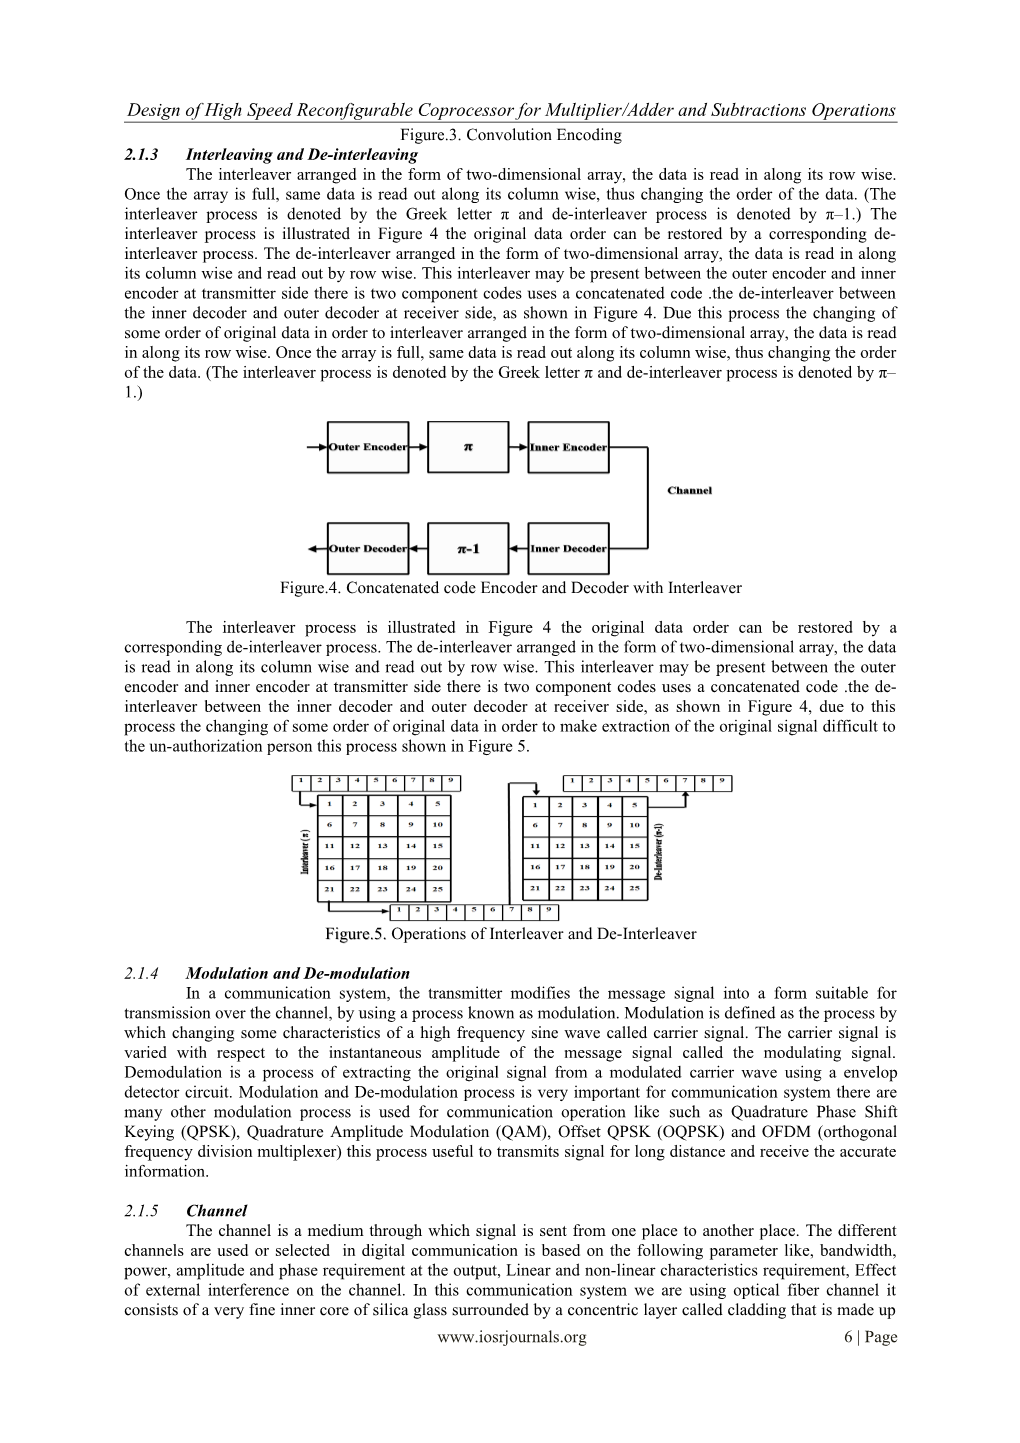 Design of High Speed Reconfigurable Coprocessor for Multiplier/Adder and Subtractions